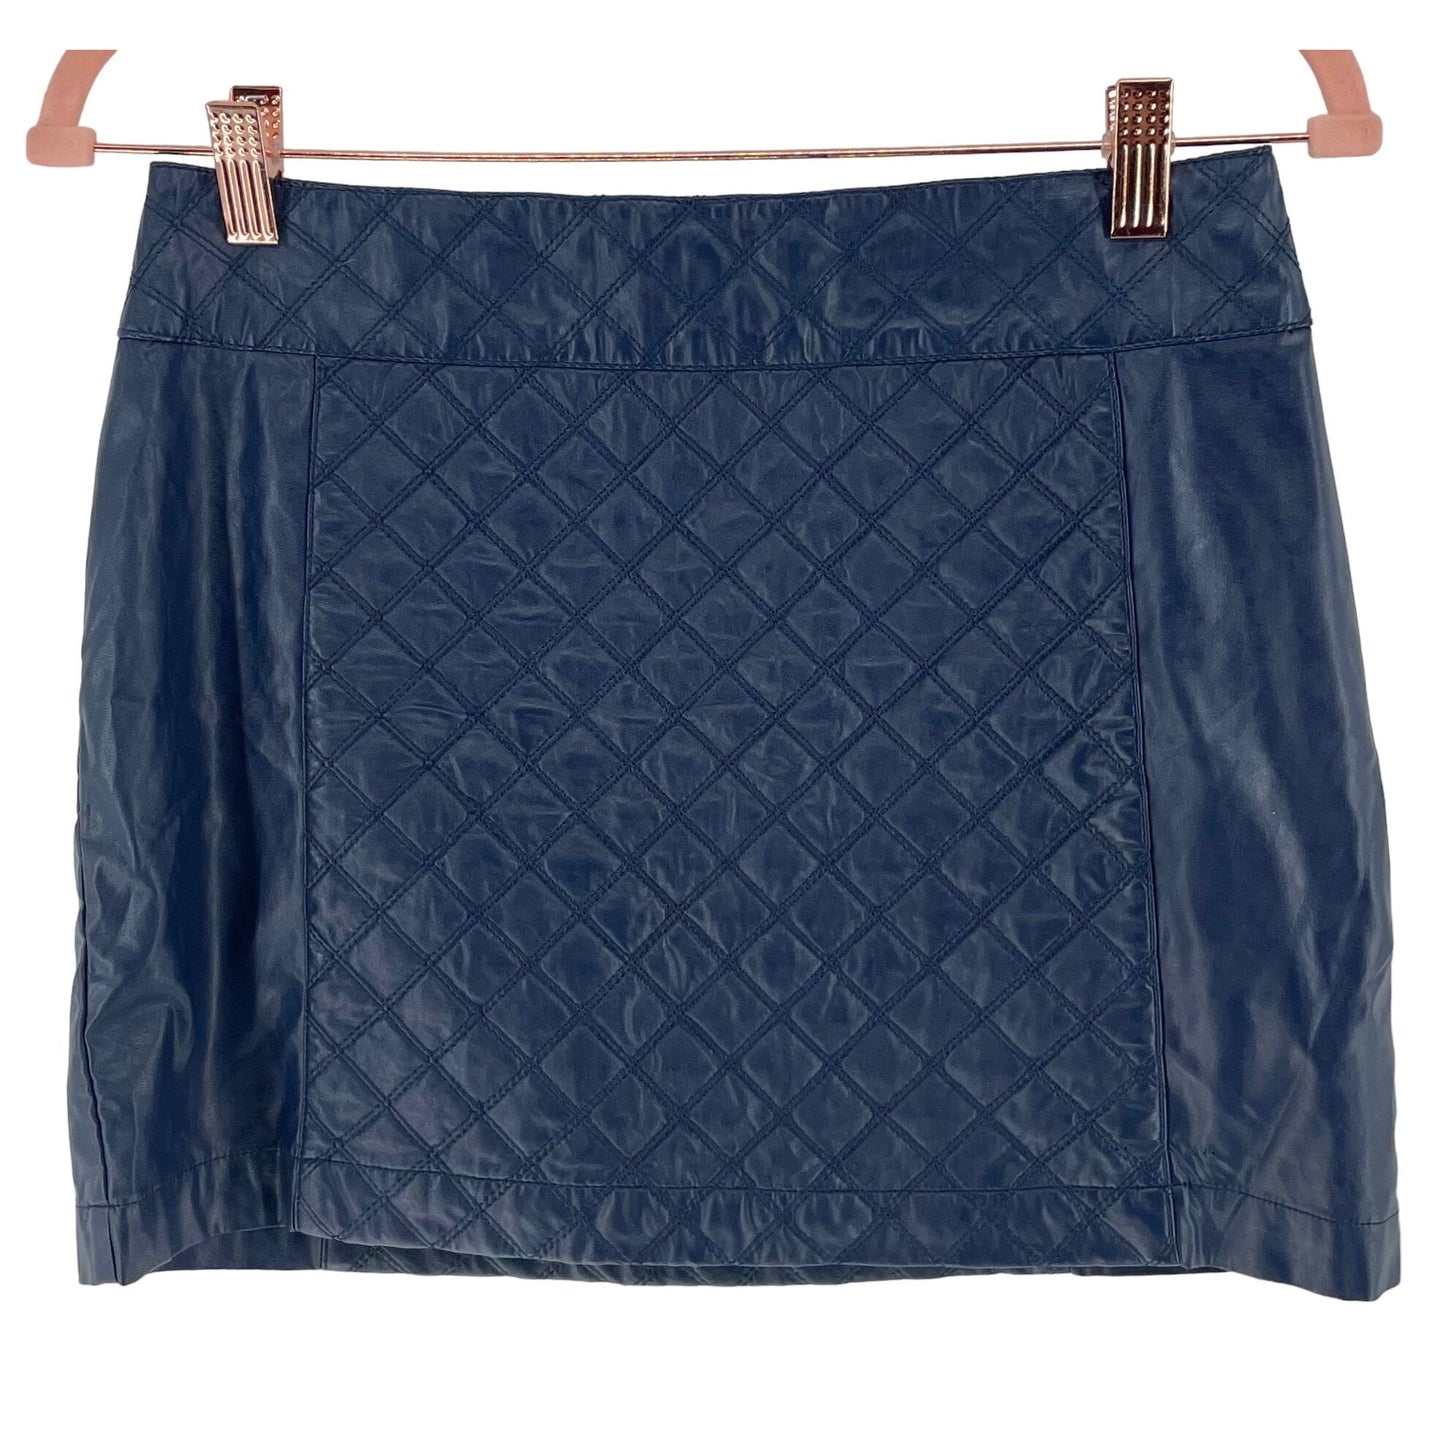 Abercrombie & Fitch Women's Navy Size 2 Quilted Faux Leather Mini Skirt